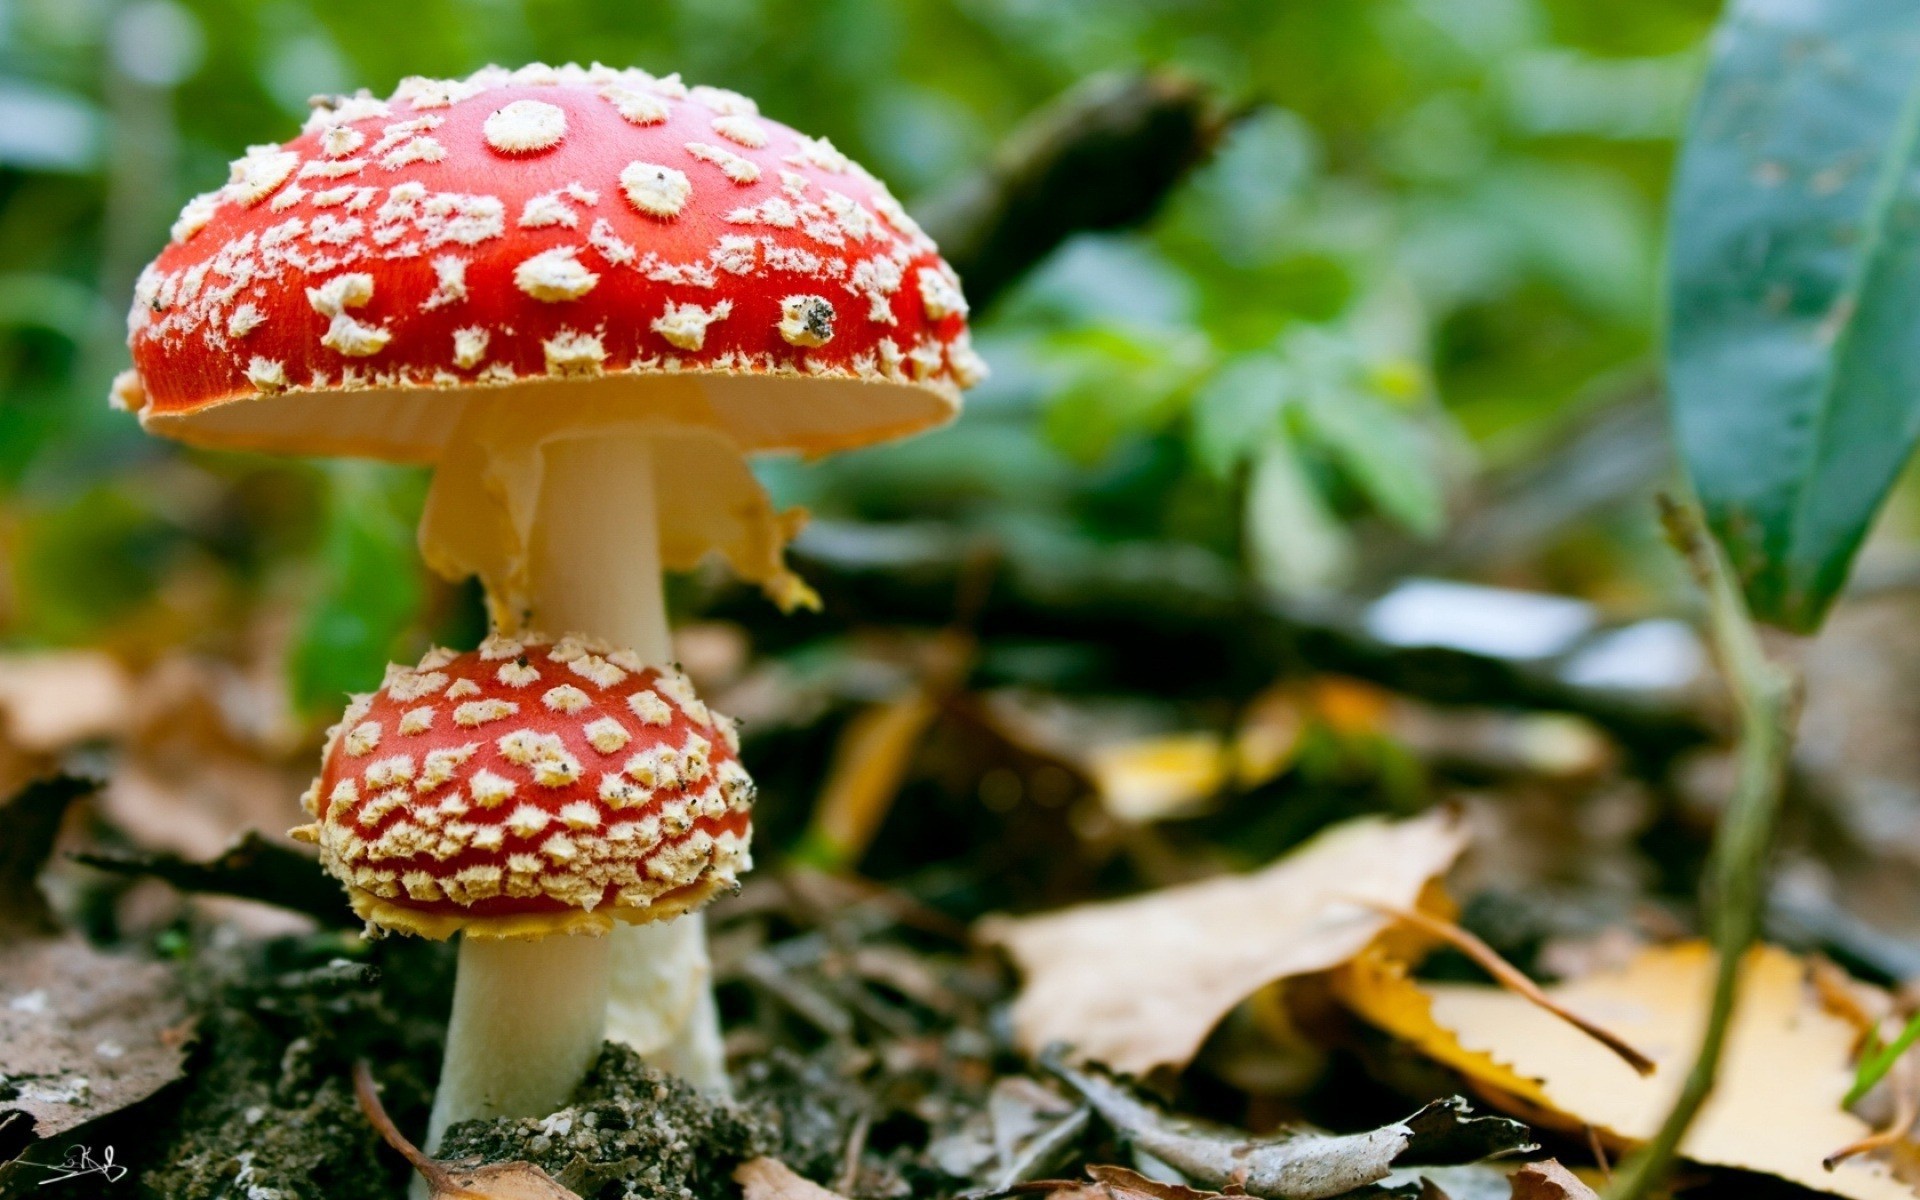 Bunch of toadstools wallpapers and images - wallpapers, pictures, photos